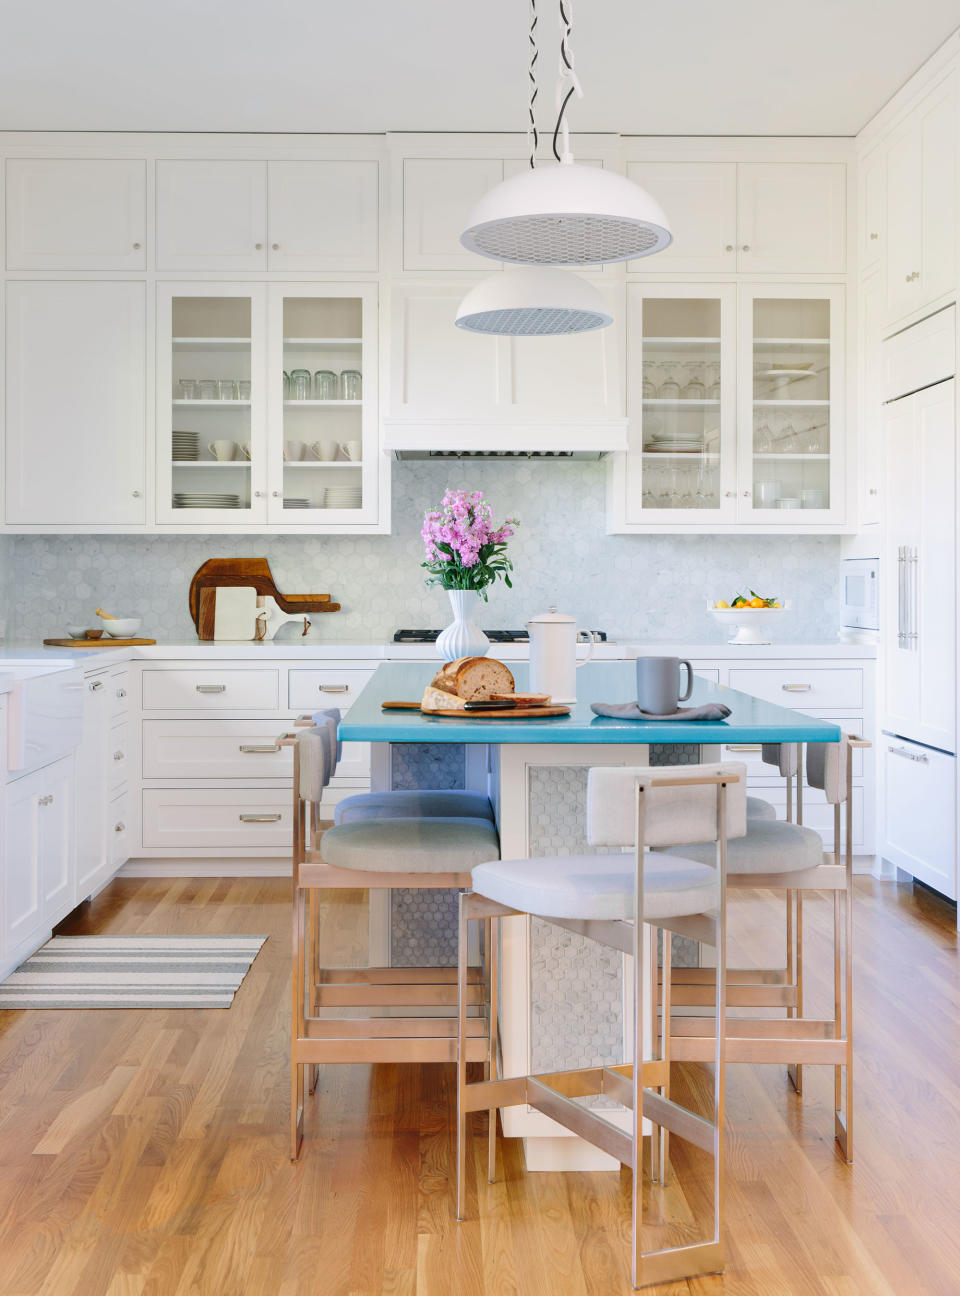 White kitchen with blue countertop and wood flooring